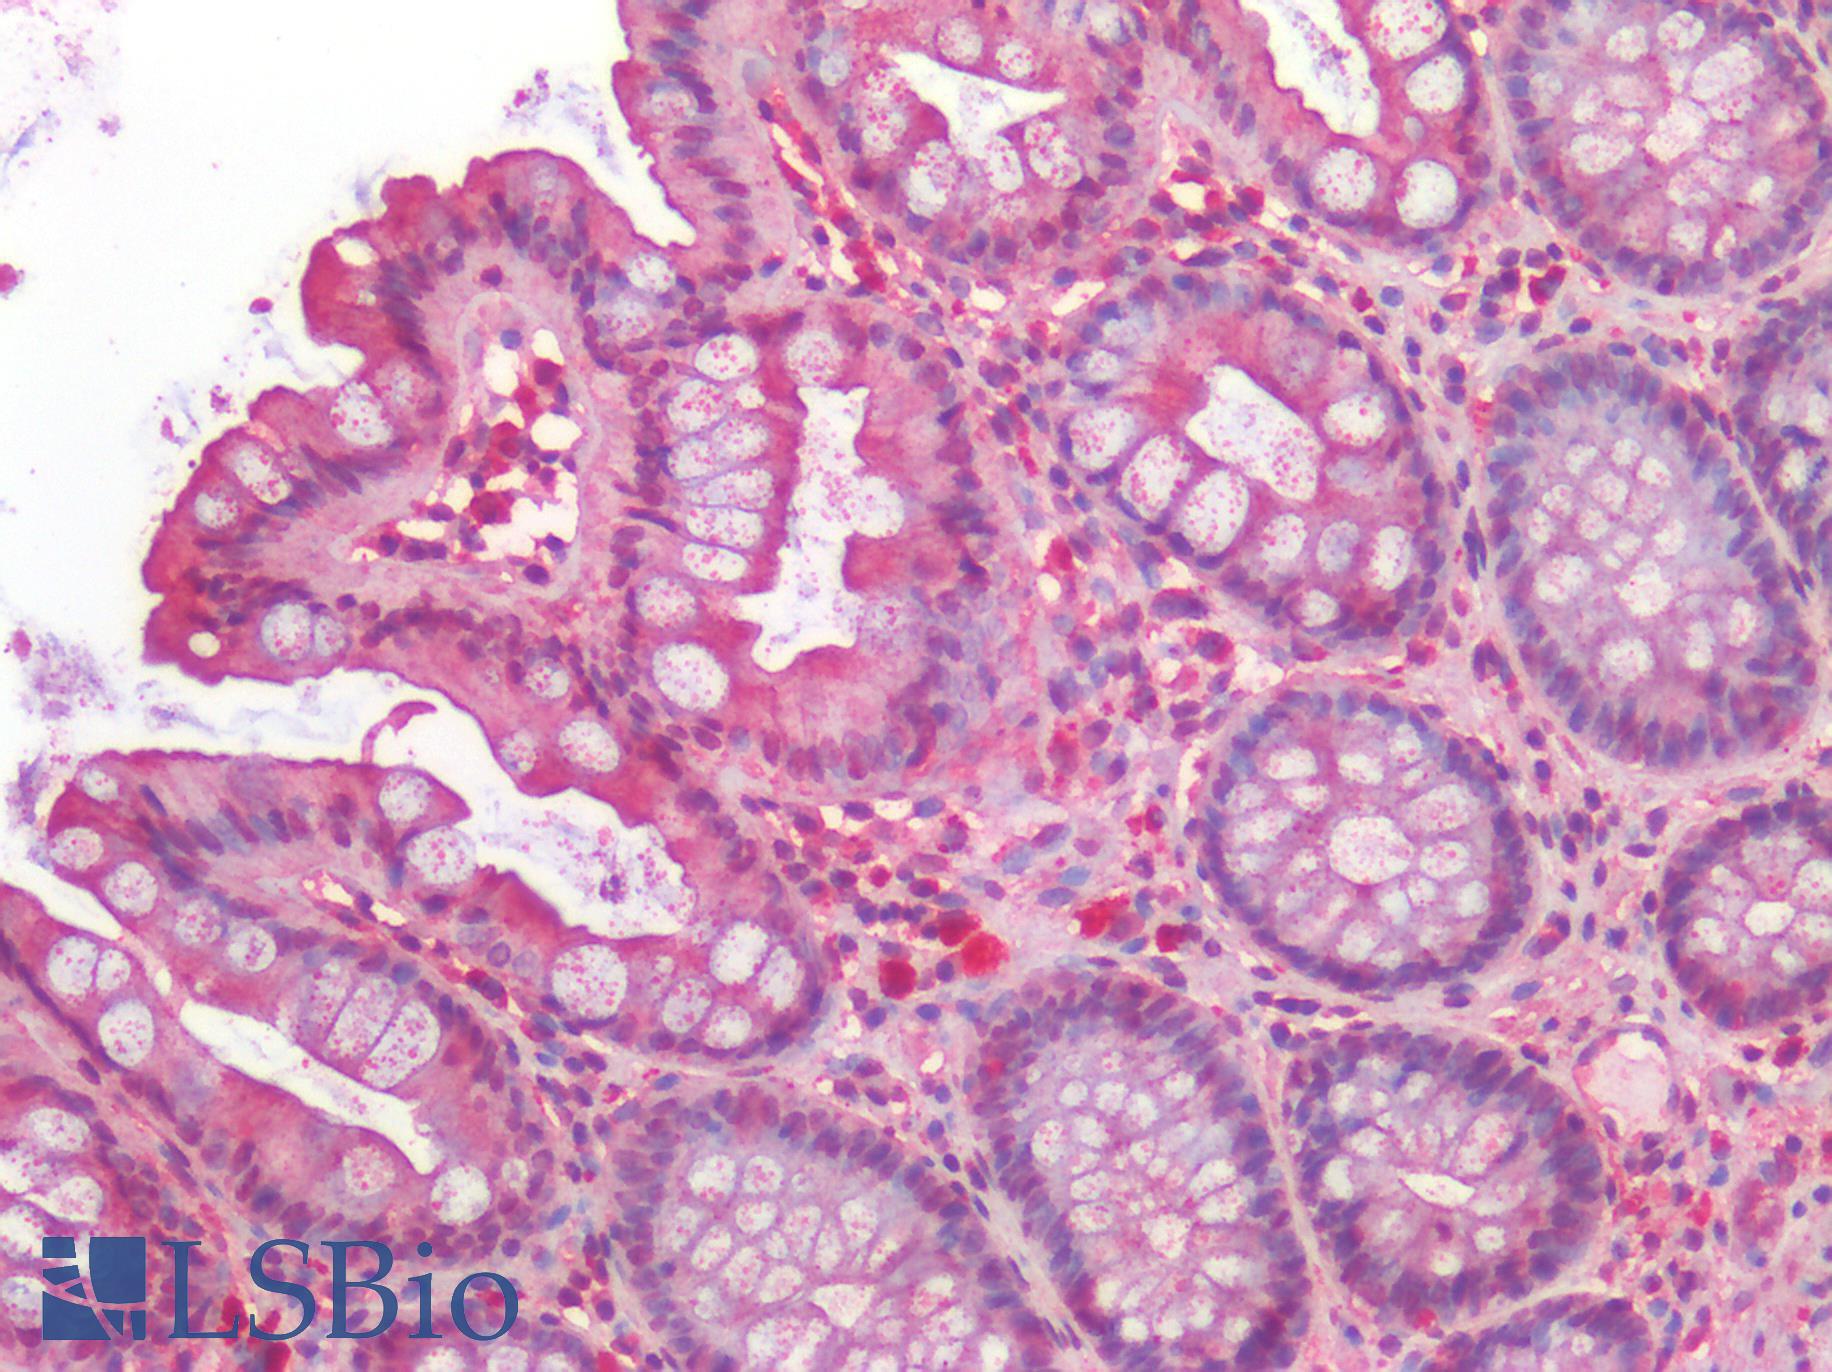 PGES / PTGES Antibody - Human Colon: Formalin-Fixed, Paraffin-Embedded (FFPE)